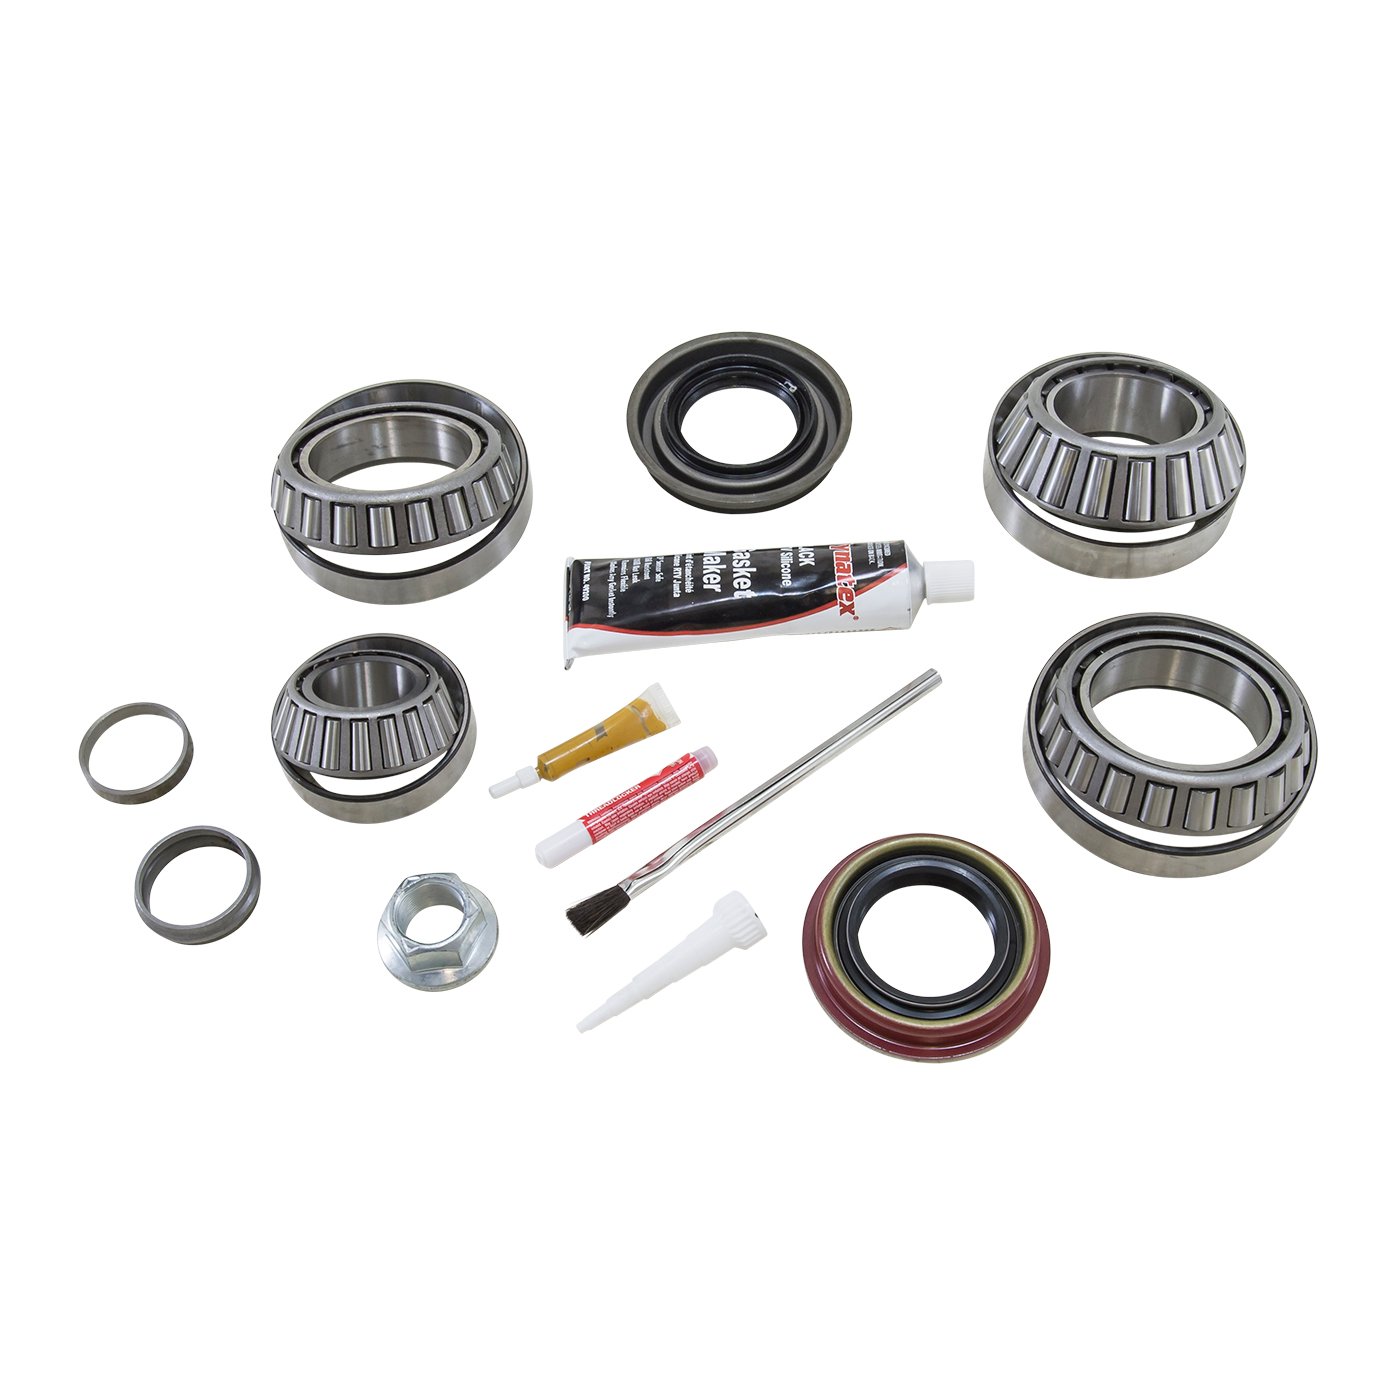 USA Standard ZBKF10.5C Bearing Kit, For '08-'10 Ford 10.5 in. With Oem Ring & Pinion Set